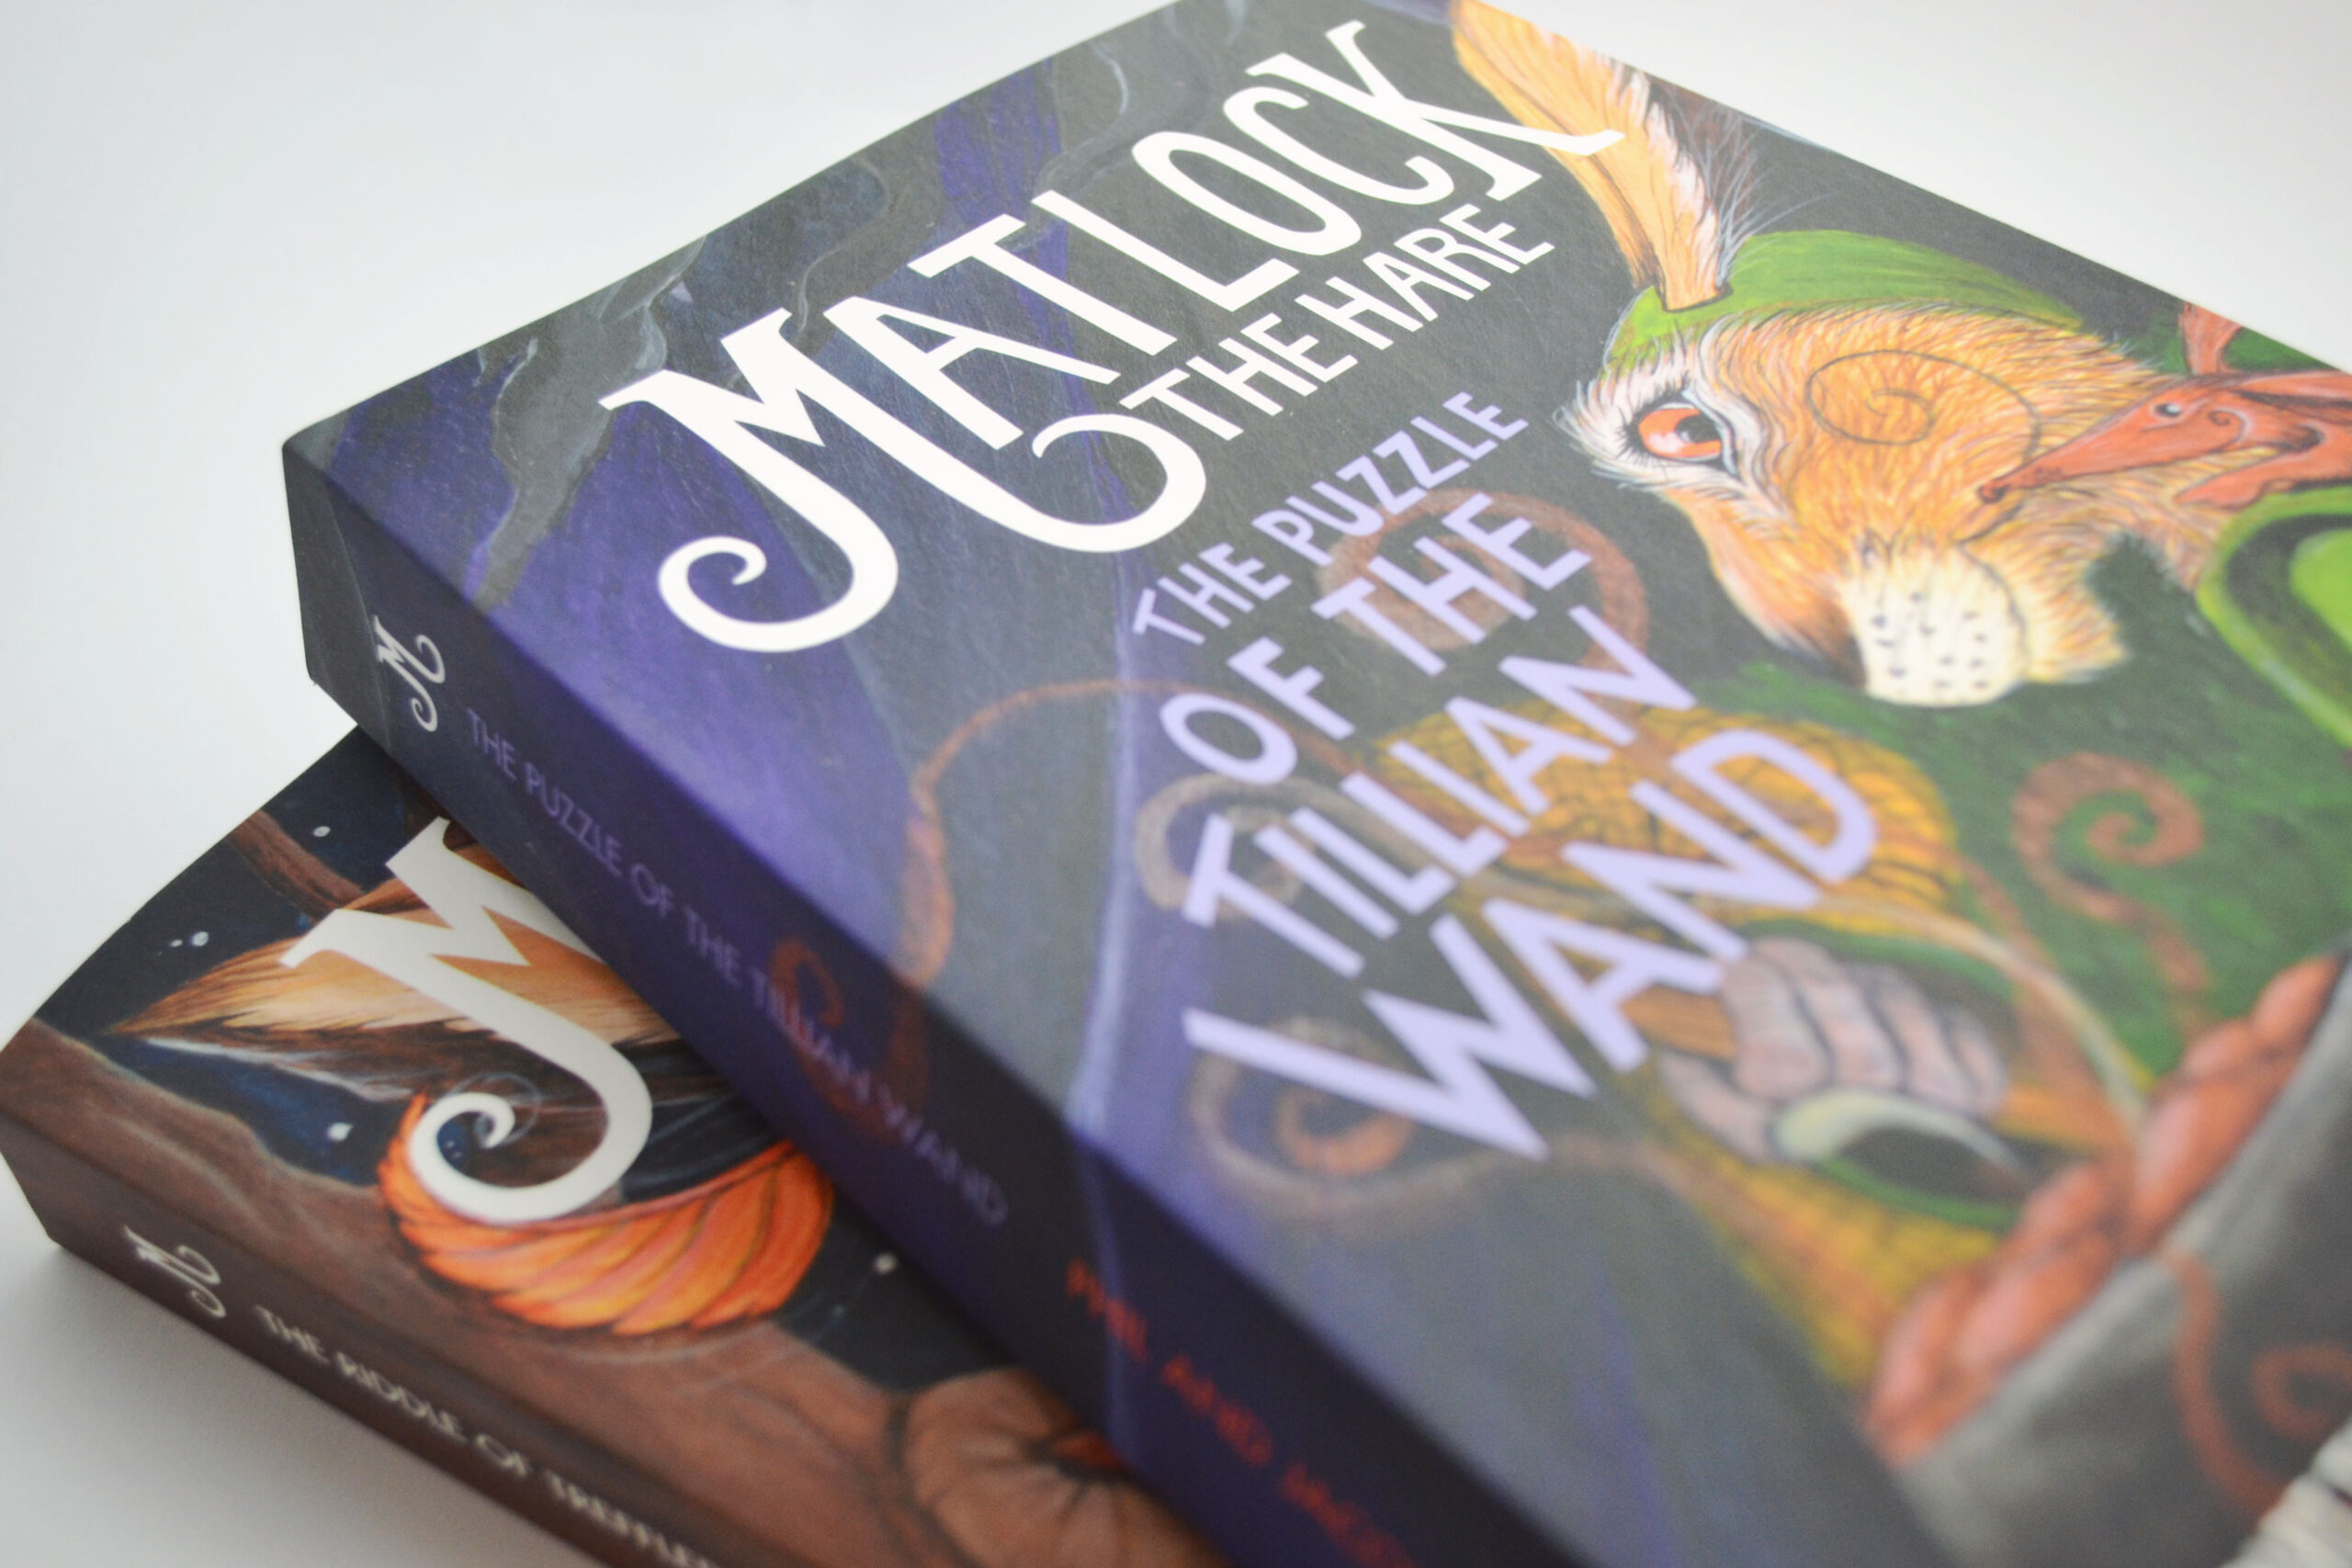 Matlock the Hare: The ‘Real’ Workings of a Majickal Hare